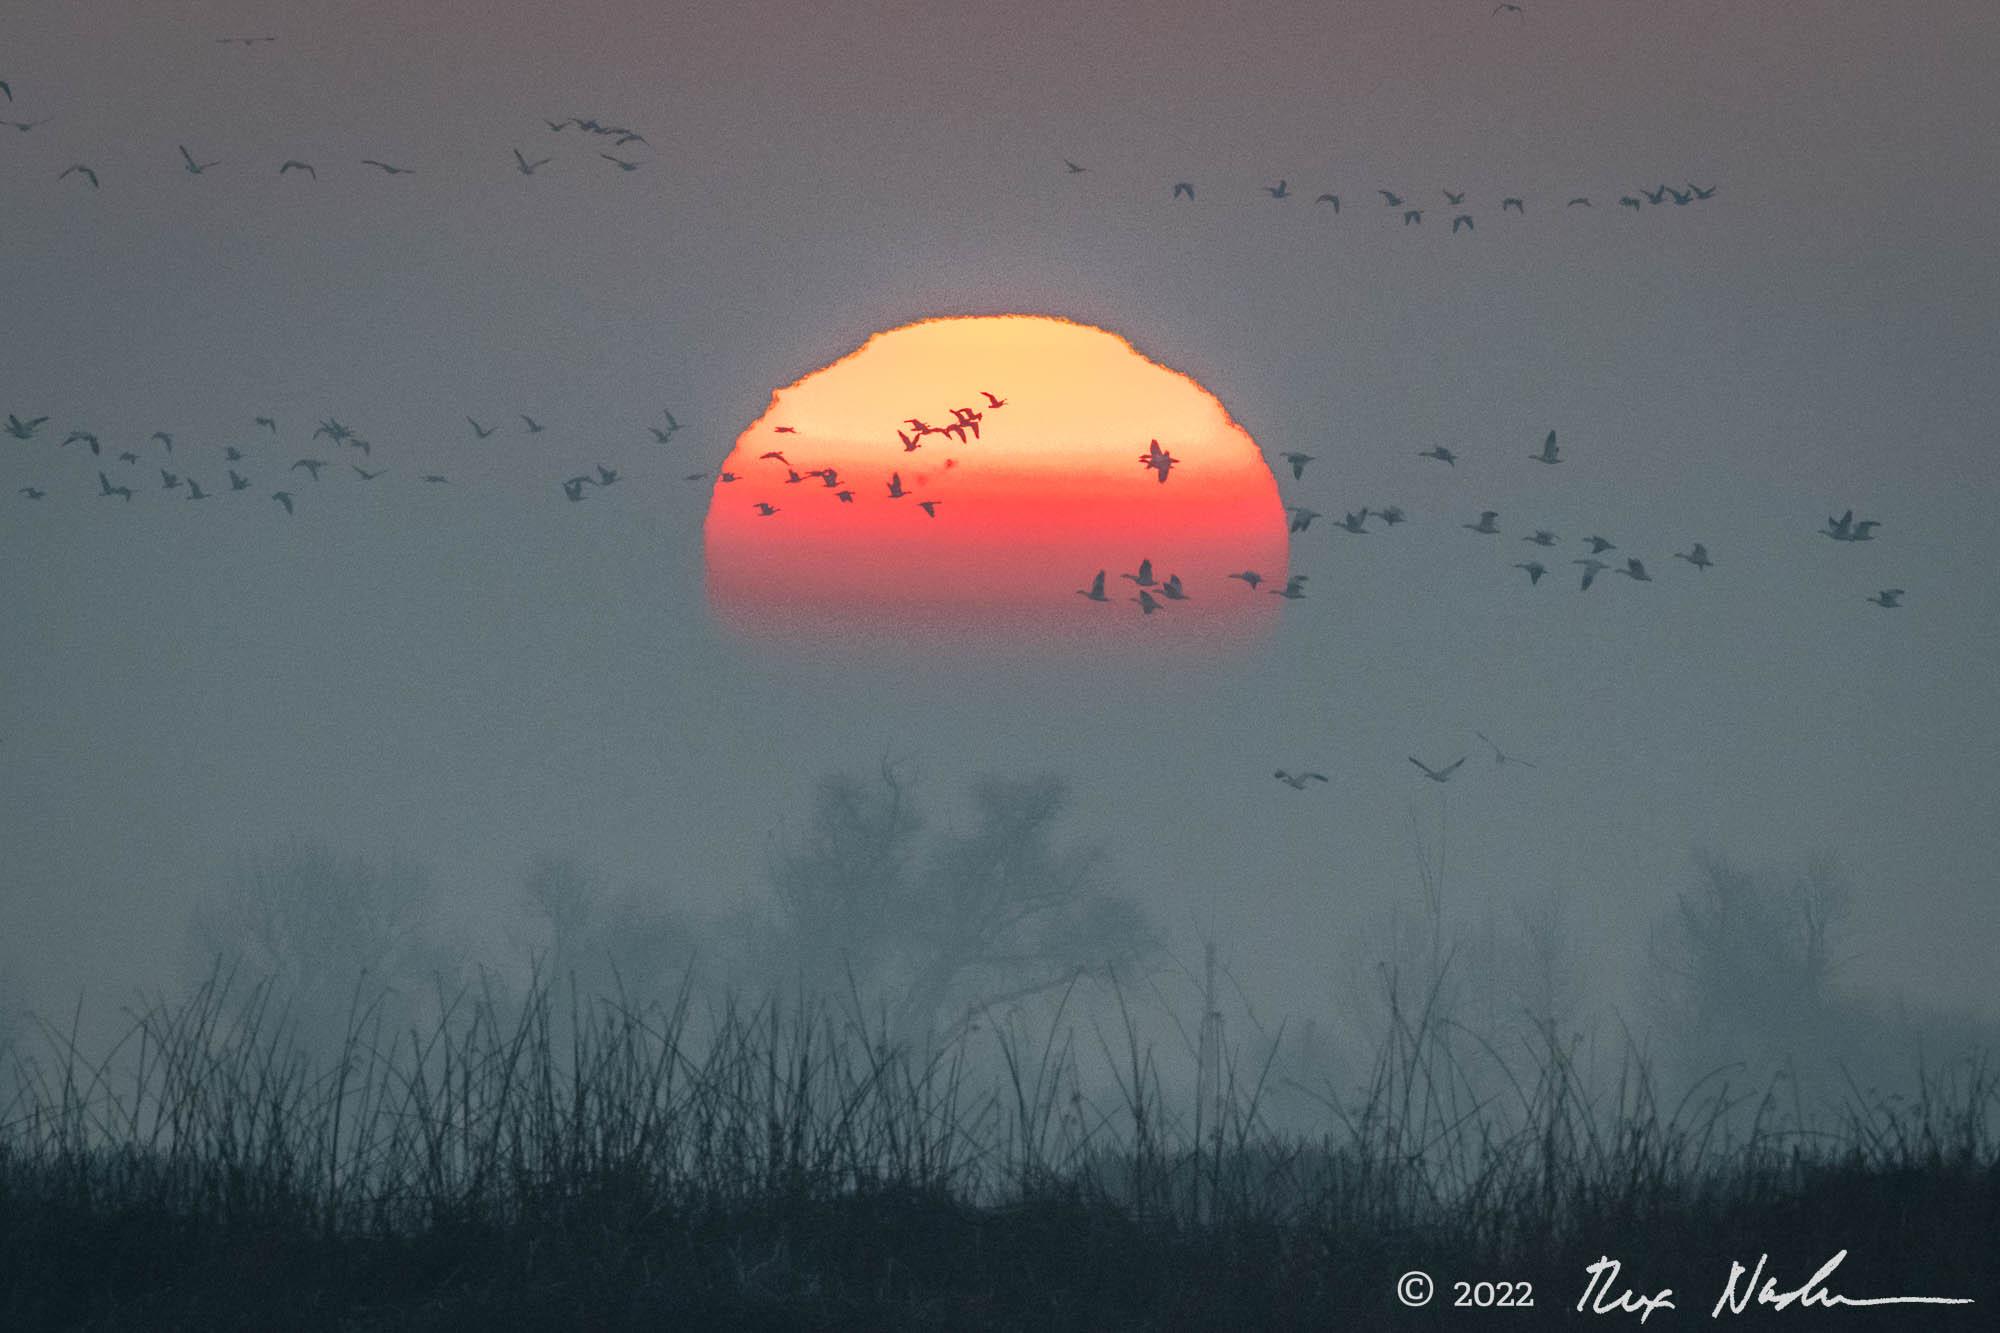 Cranes with Sunspots - Merced NWR